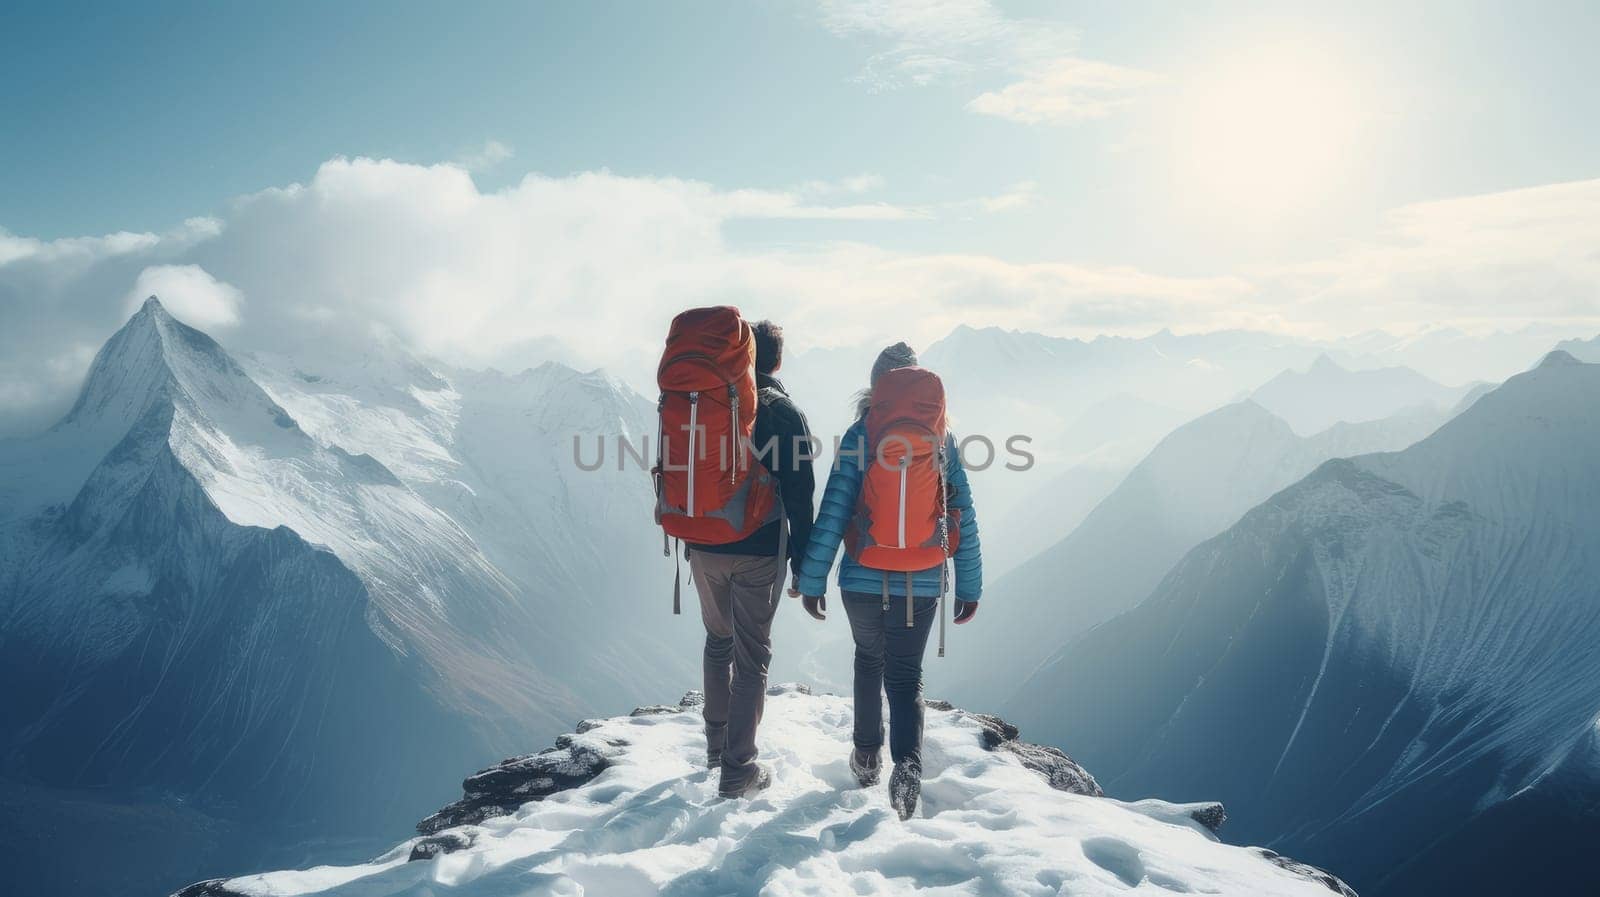 Happy, young loving couple high on snowy mountains at a ski resort, during vacation and winter holidays. Concept of traveling around the world, recreation, winter sports, vacations, tourism in the mountains and unusual places.